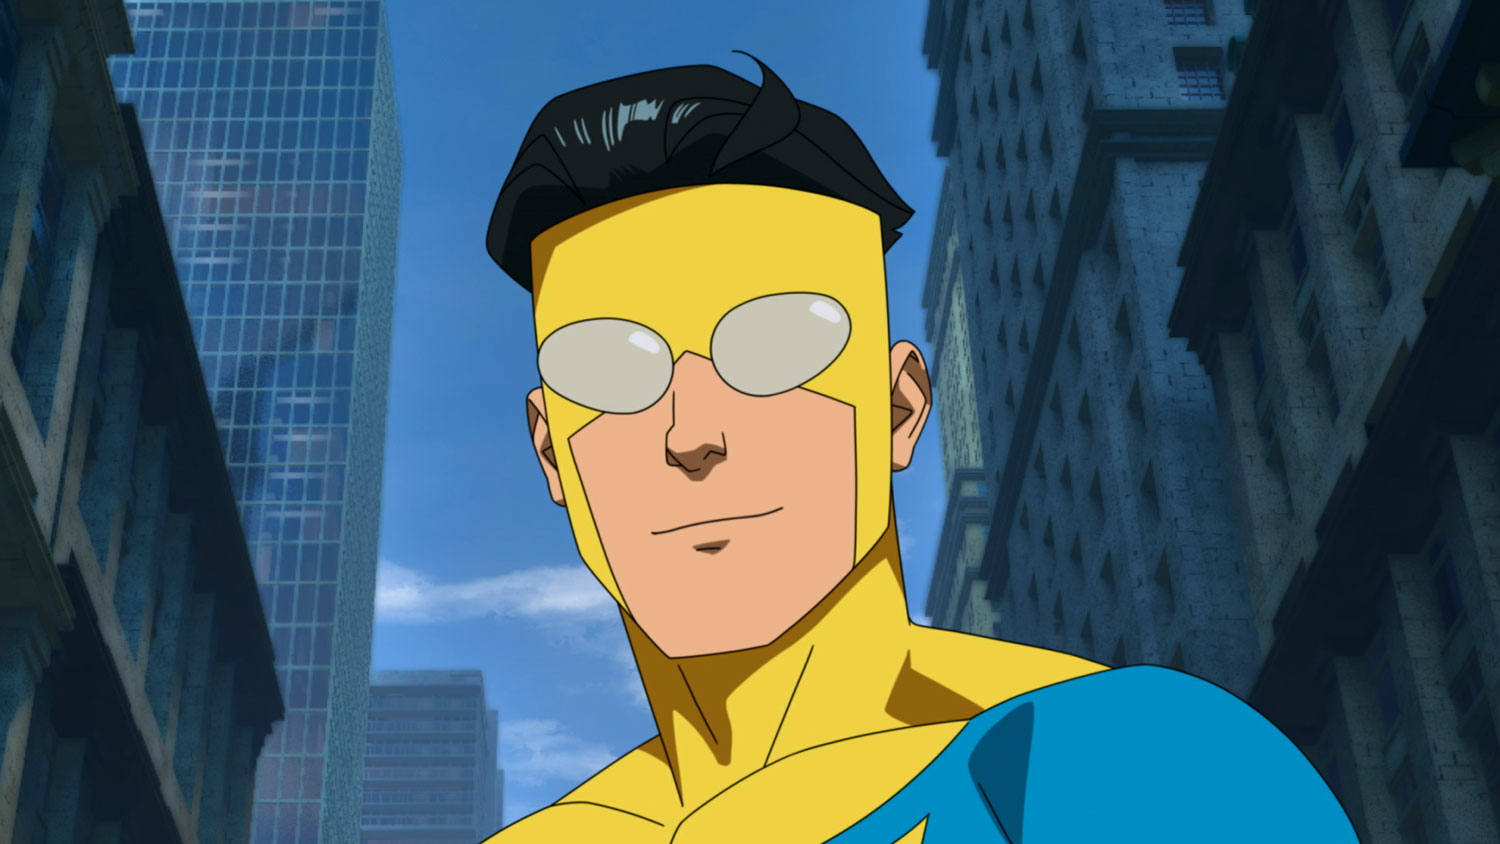 Invincible Season 2: Main Video Release Date, Cast and Story